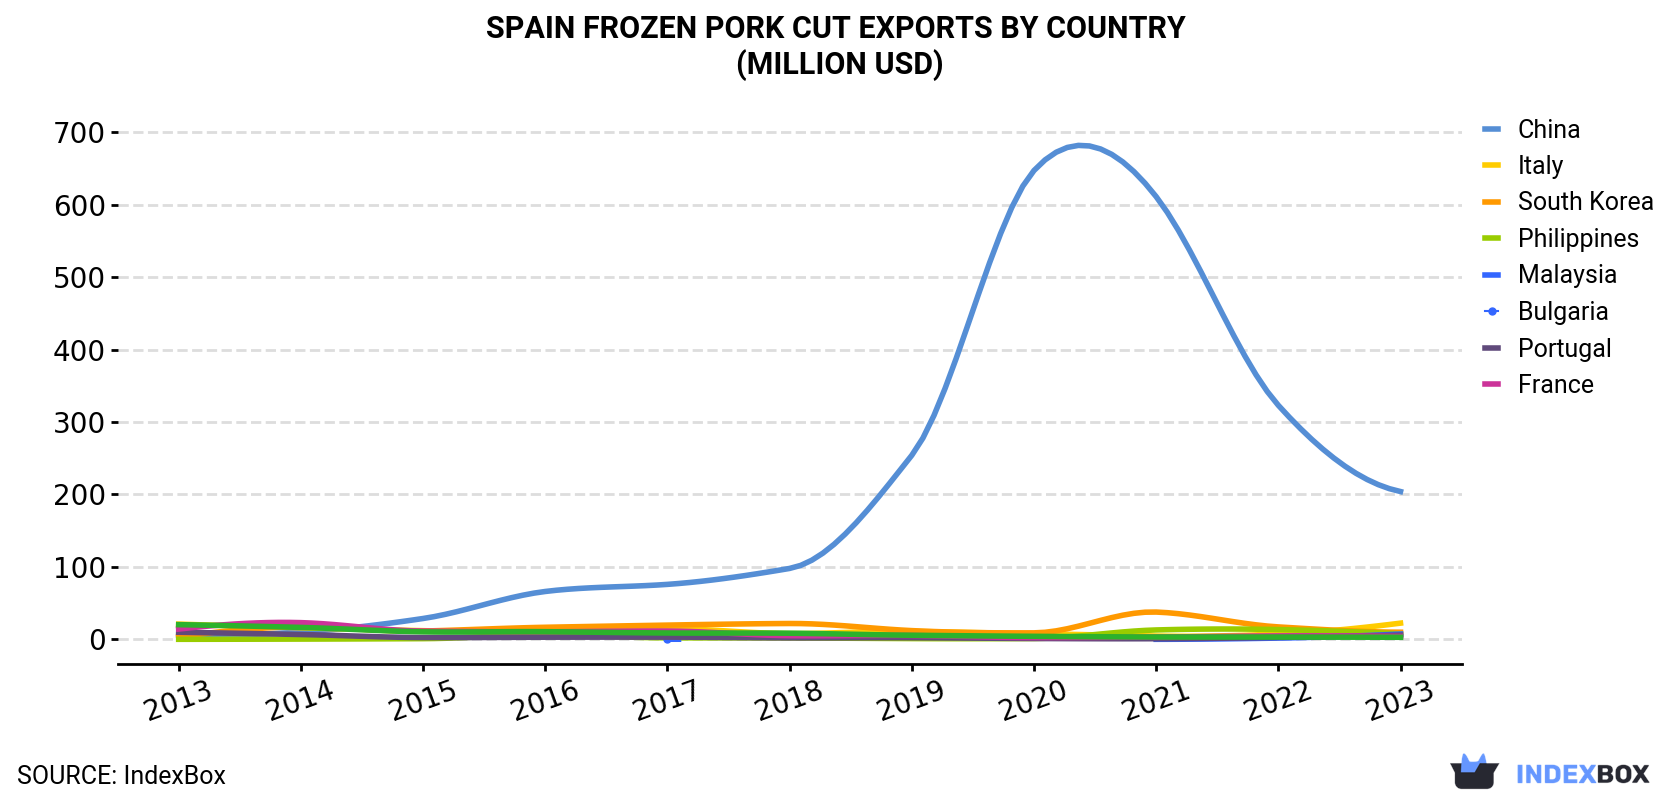 Spain Frozen Pork Cut Exports By Country (Million USD)